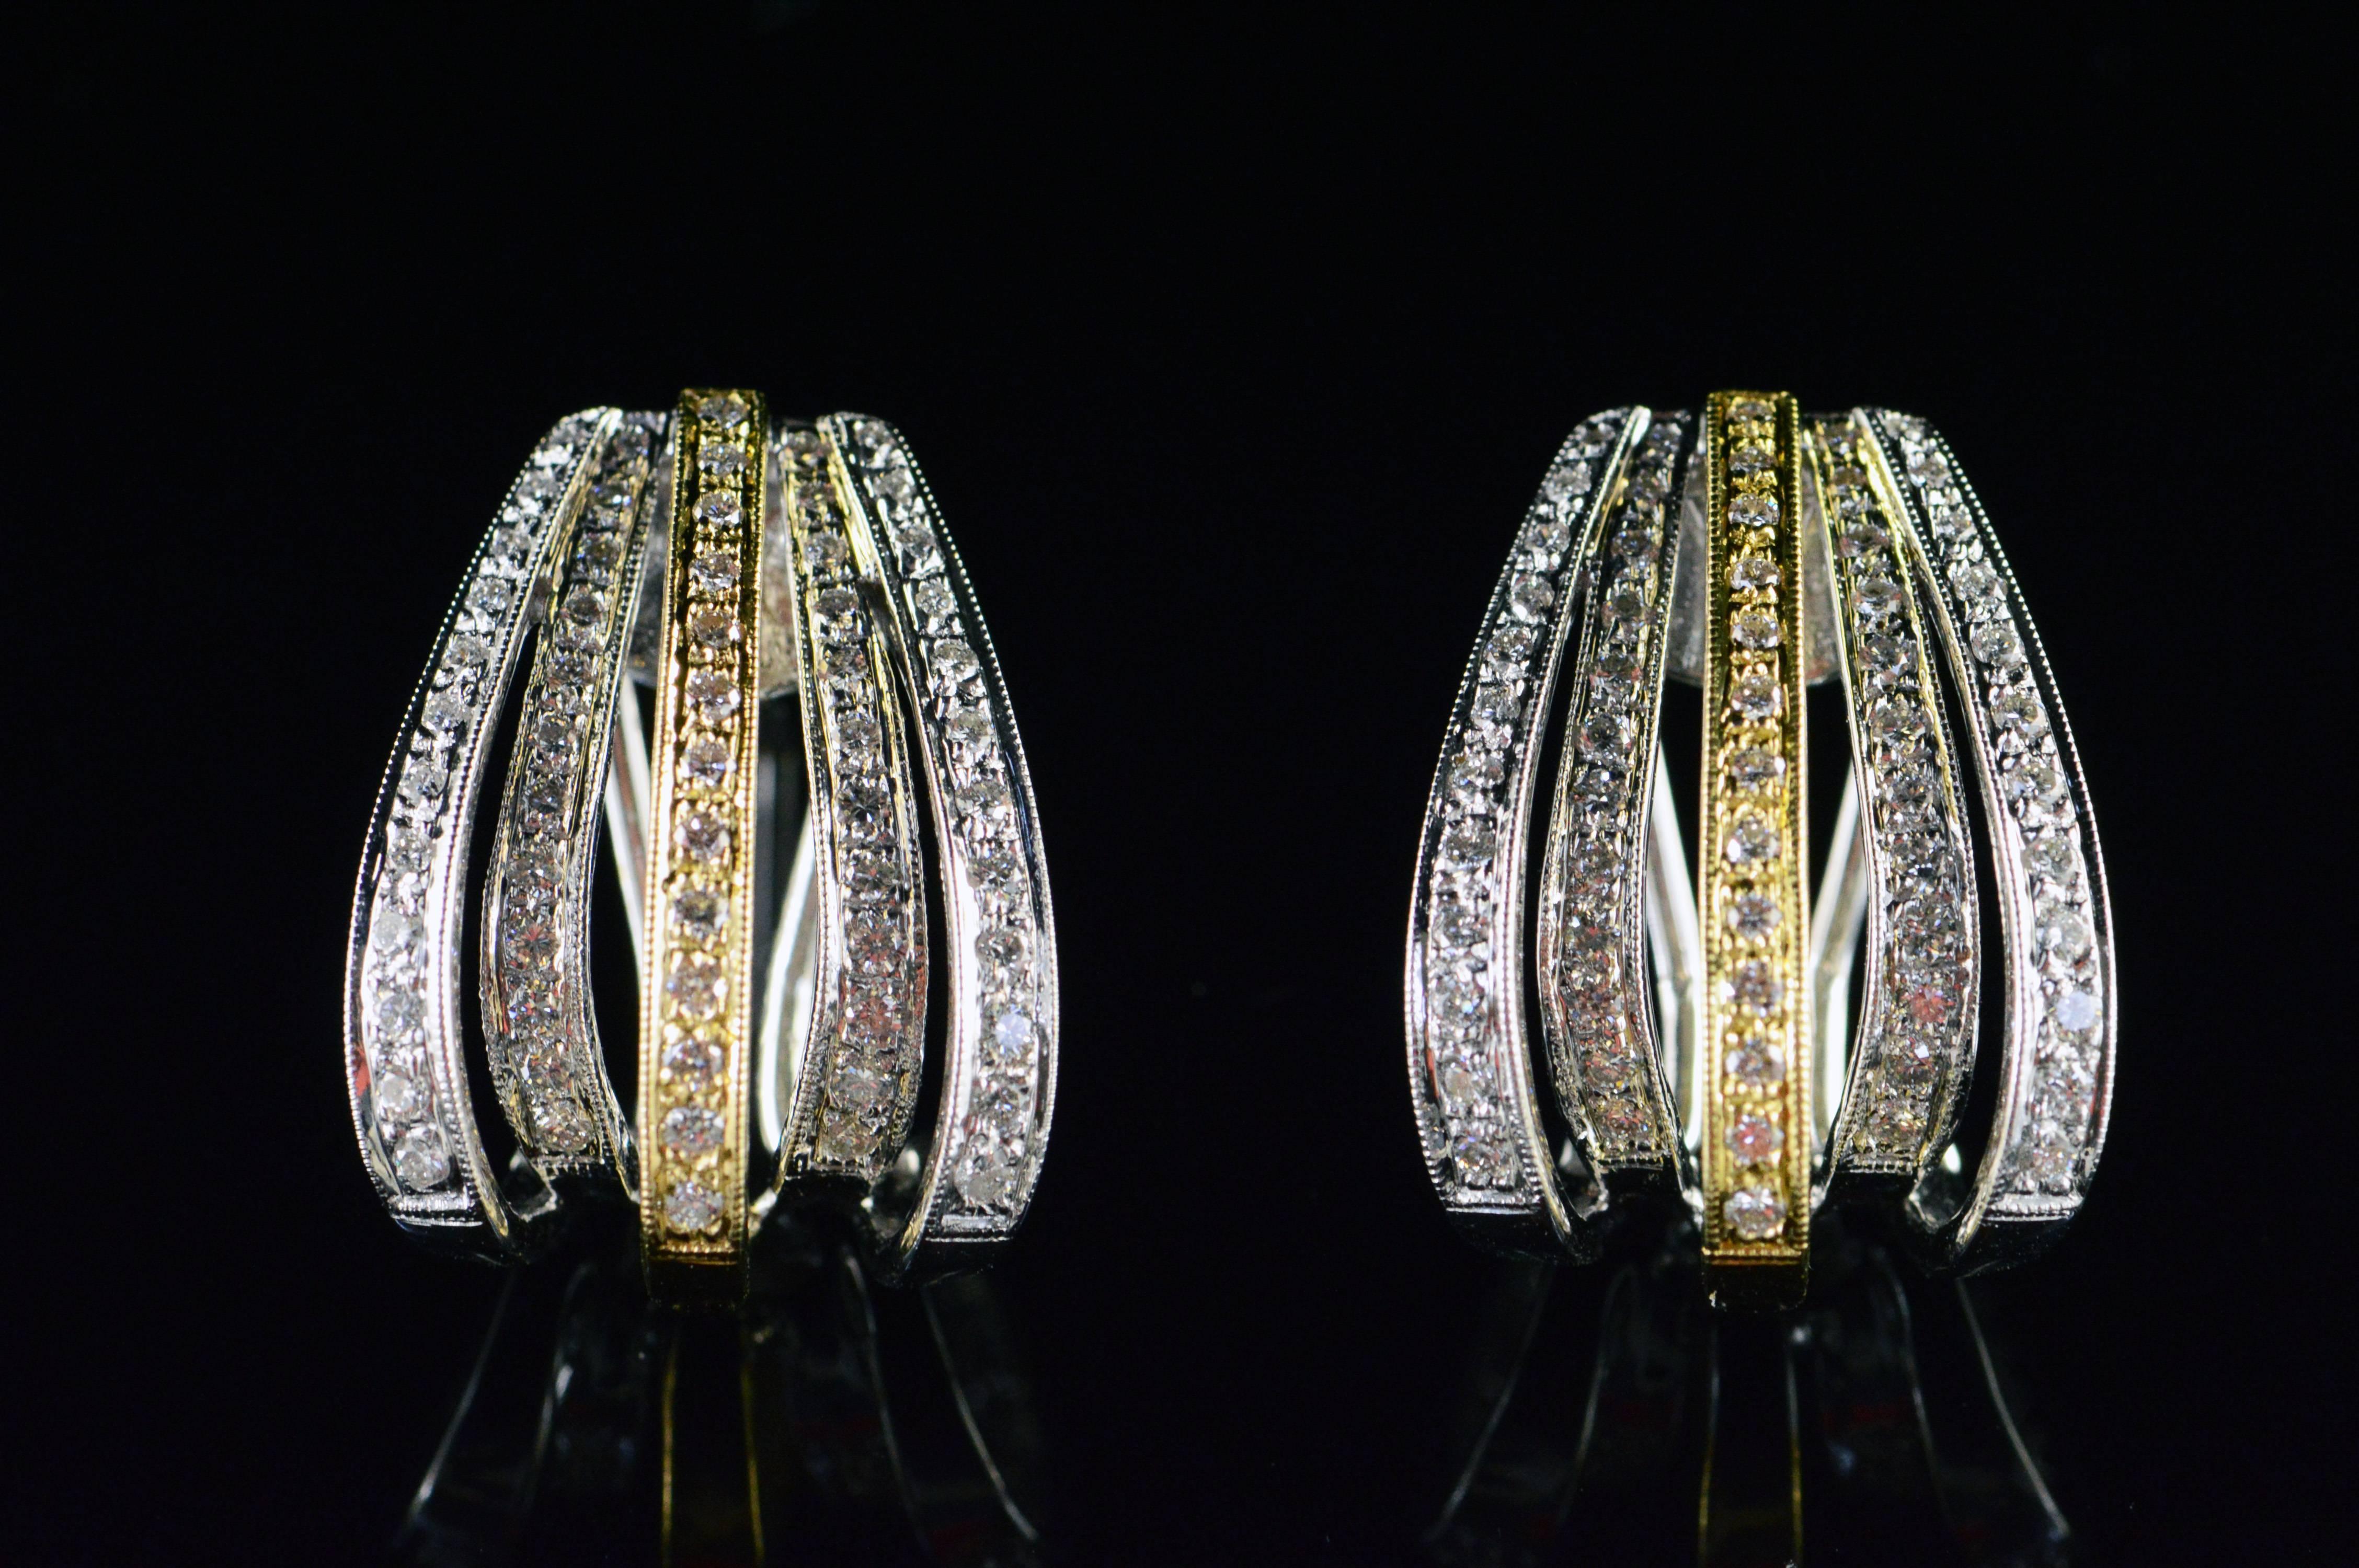 All diamonds are graded according to GIA grading standards.

·Item: 18K 1.00 CTW Diamond Scallop French Clip Earrings White/Yellow Gold

·Era/Date: Modern / 2000s

·Composition: 18k Gold Marked / Tested

·Gem Stone: 118x Diamonds=1.00ctw